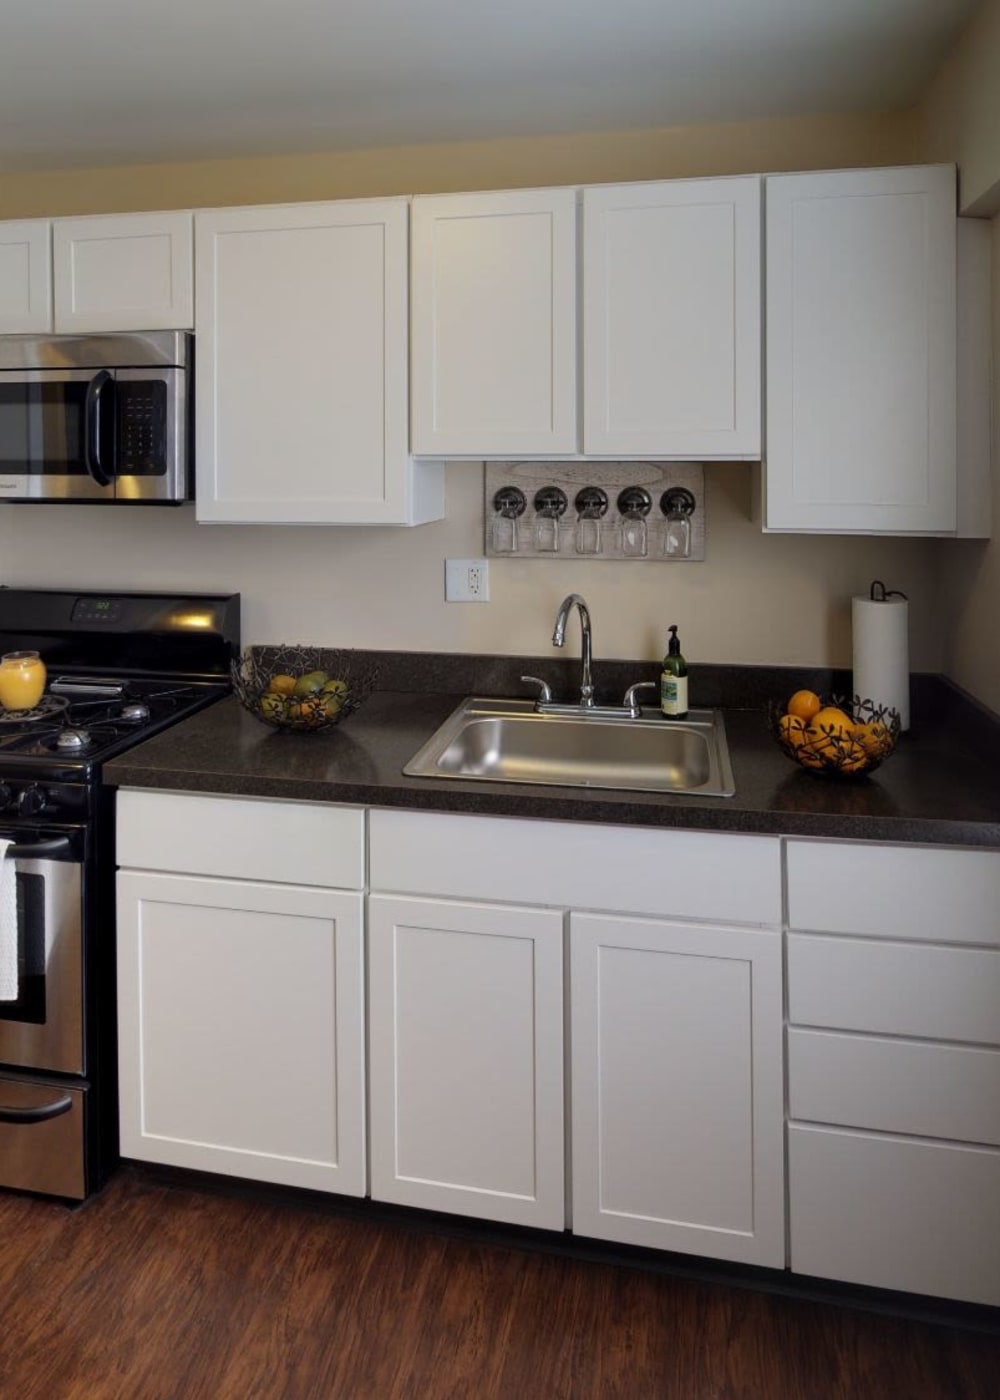 Kitchen at Rugby Square Apartments in Syracuse, New York